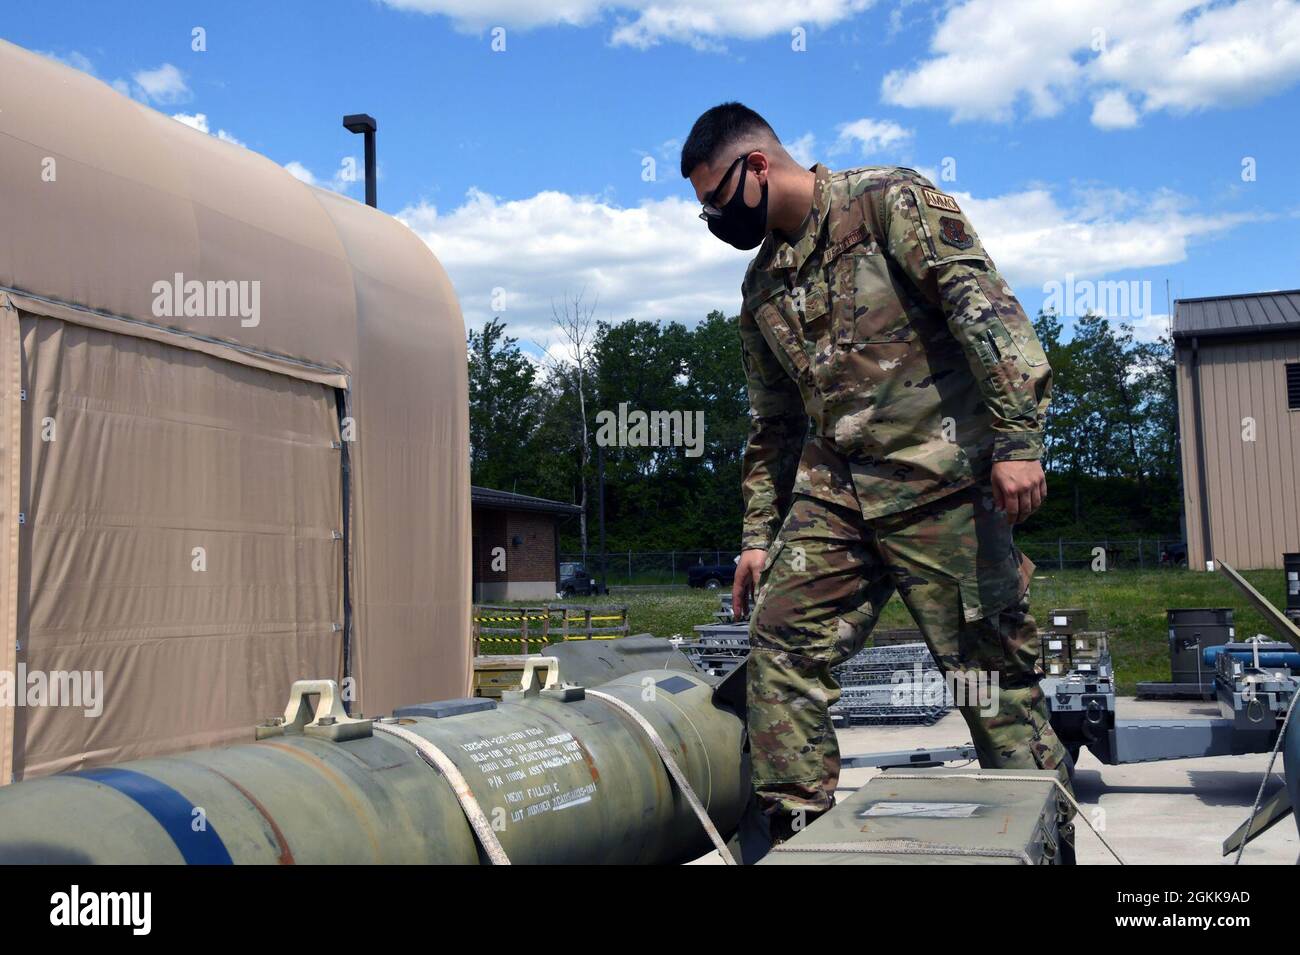 Airman First Class Carlos León, munitions systems technician, 113th Maintenance Squadron, secures a load, May 14, 2021, at Joint Base Andrews, Maryland. The 113th Wing is celebrating Asian American and Pacific Islander Heritage Month, honoring the contributions of Asians and Pacific Islanders to the history, culture and achievements of the United States. Stock Photo